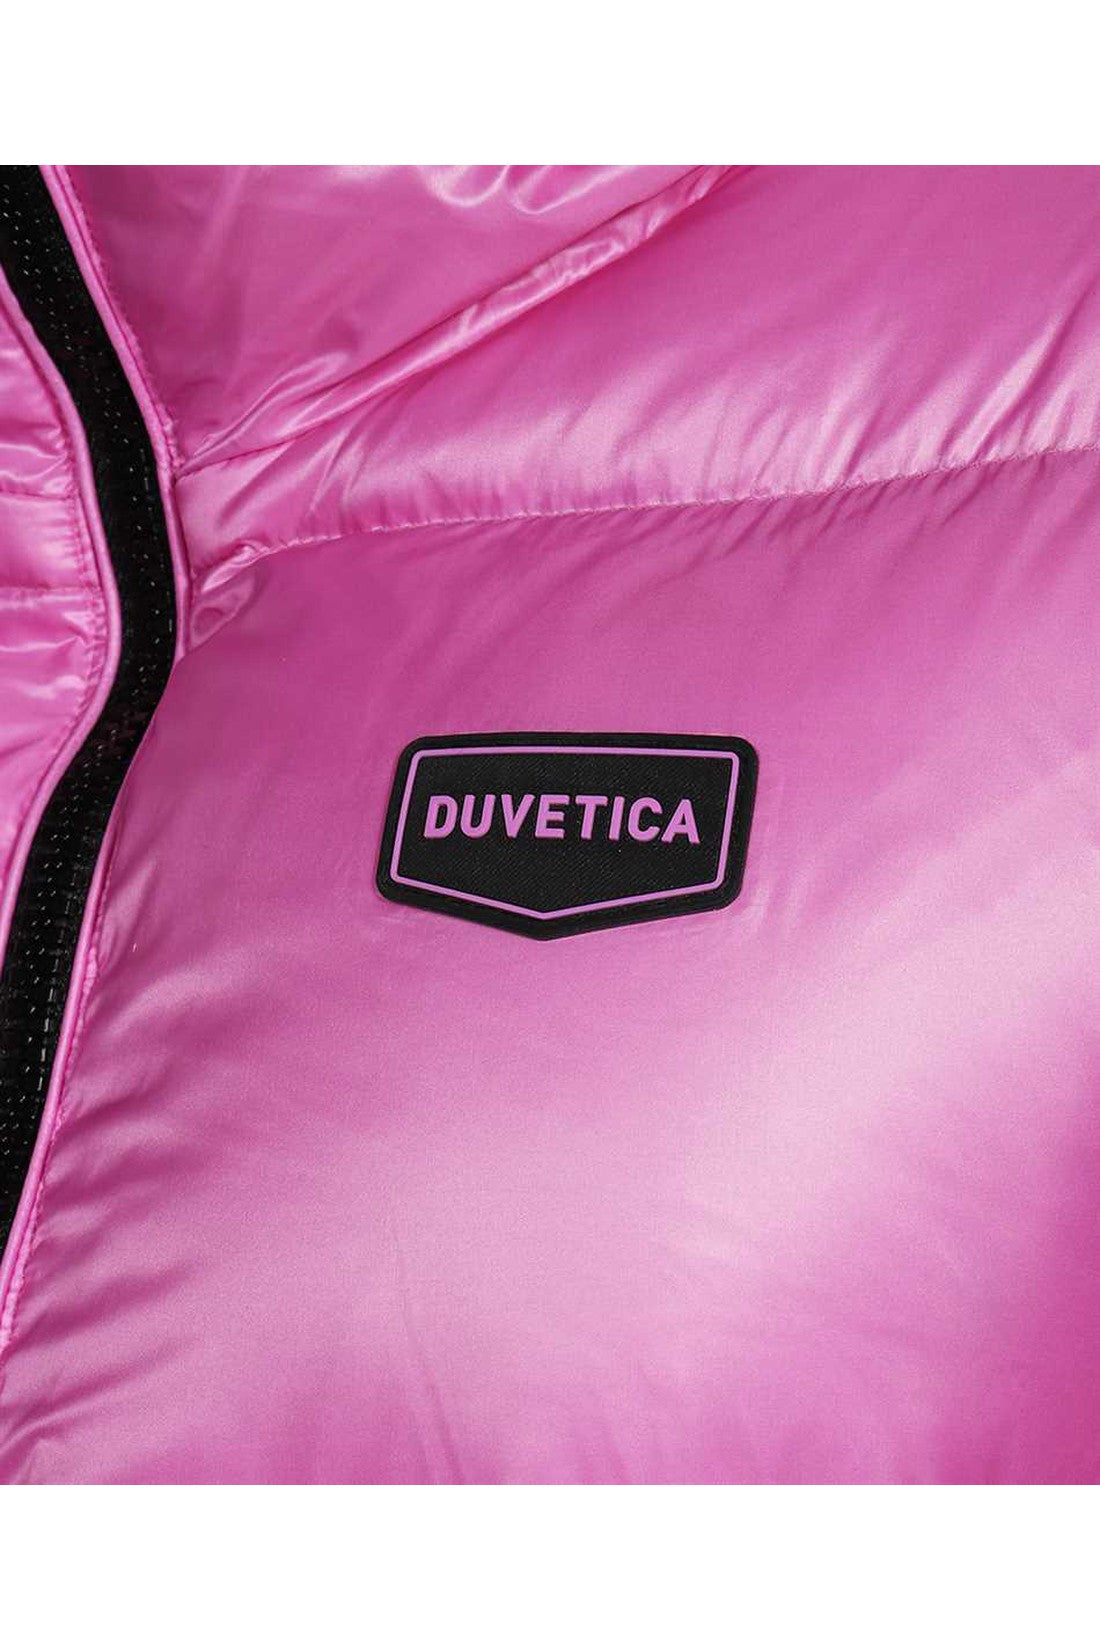 Duvetica-OUTLET-SALE-Belted-hooded-long-down-jacket-Jacken-Mantel-ARCHIVE-COLLECTION-3_c5e04e57-e476-4c64-8cce-61cc75b4ee7f.jpg